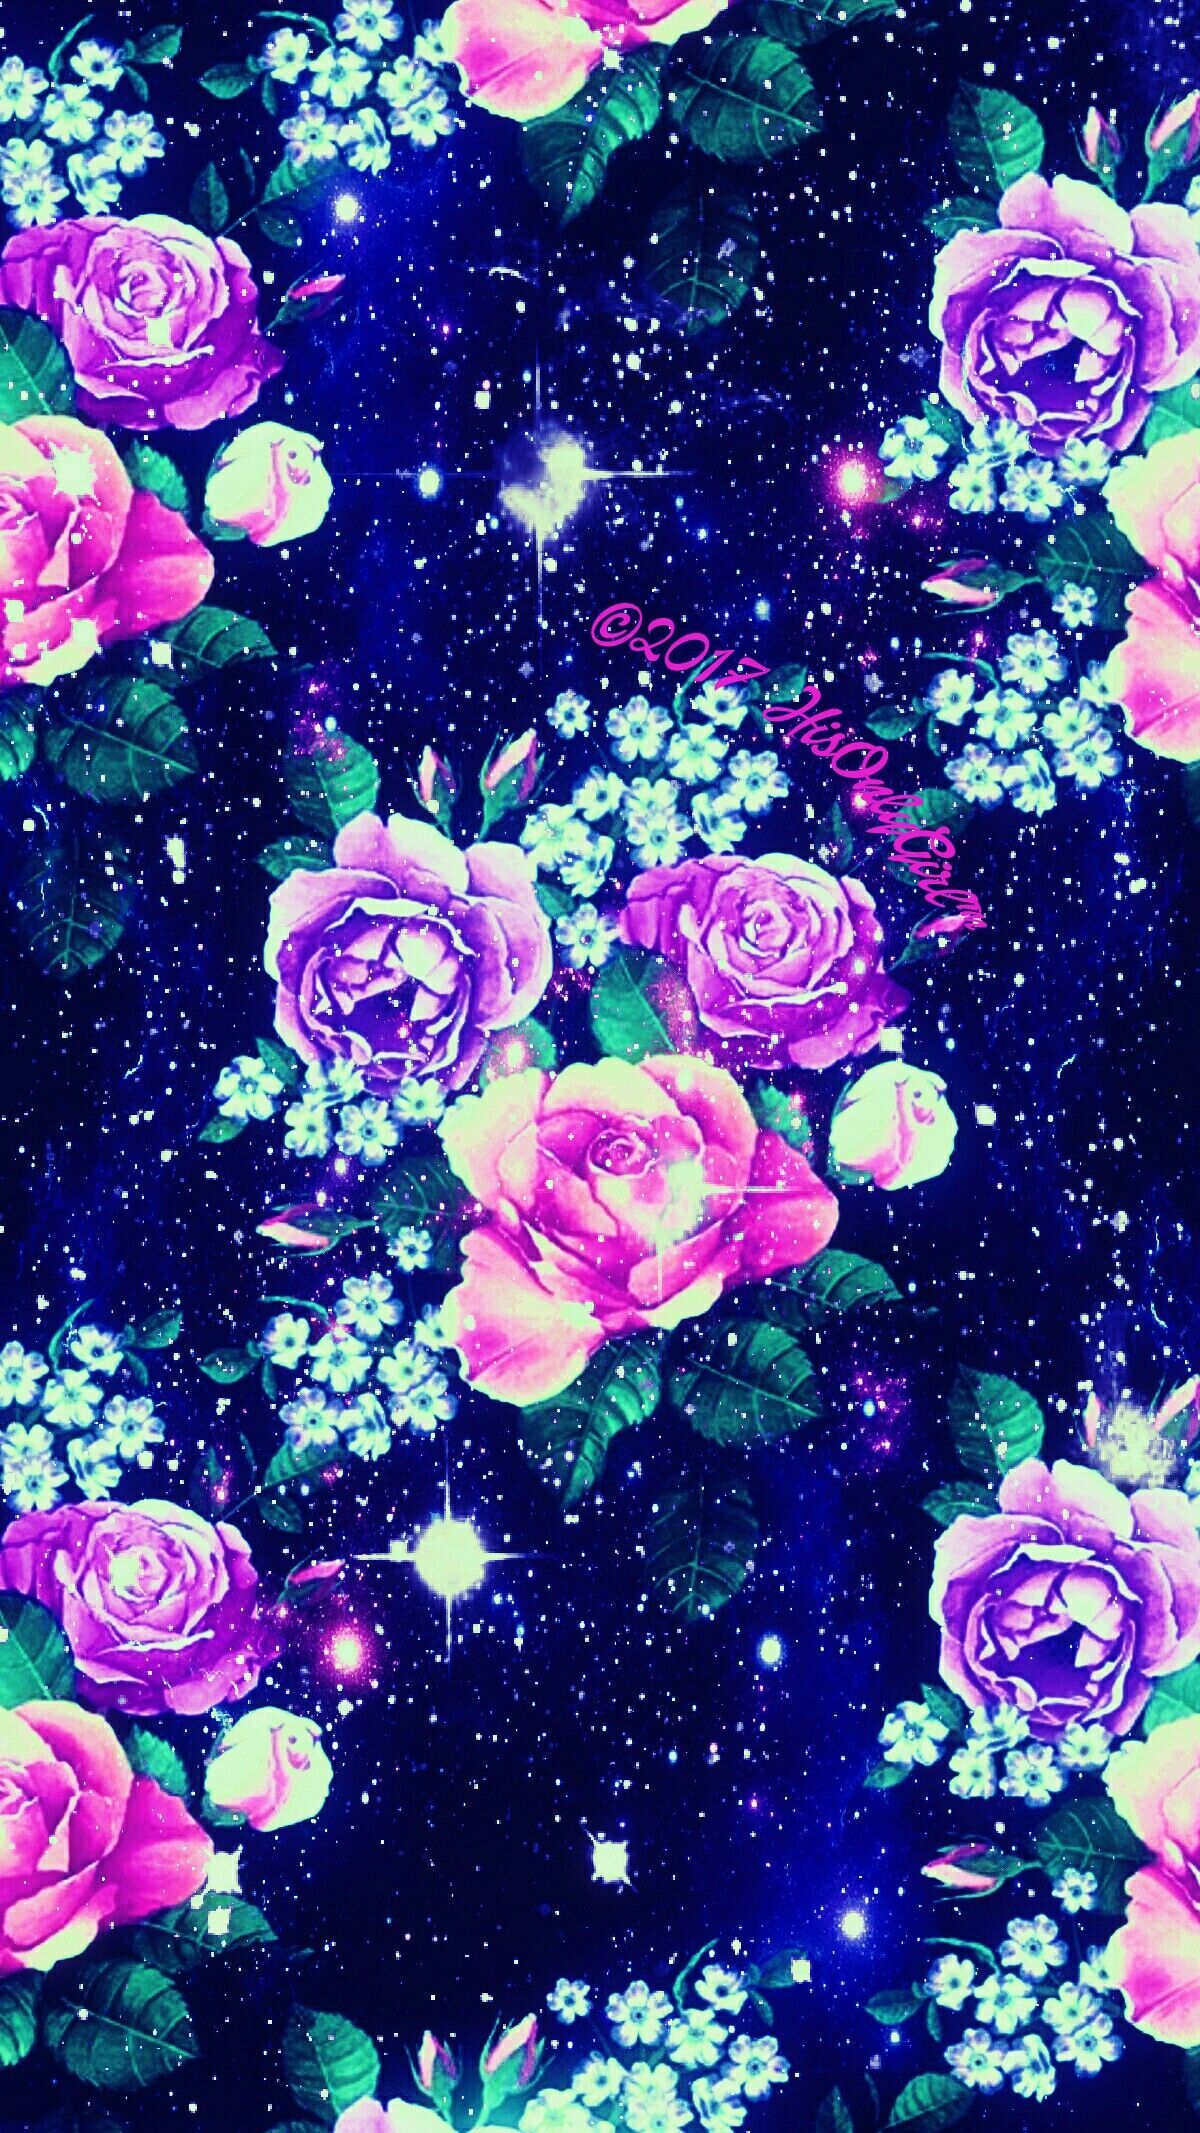 Sweet flowers galaxy wallpaper I created for the app CocoPPa!. Galaxy flowers, Flowery wallpaper, Unicorn wallpaper